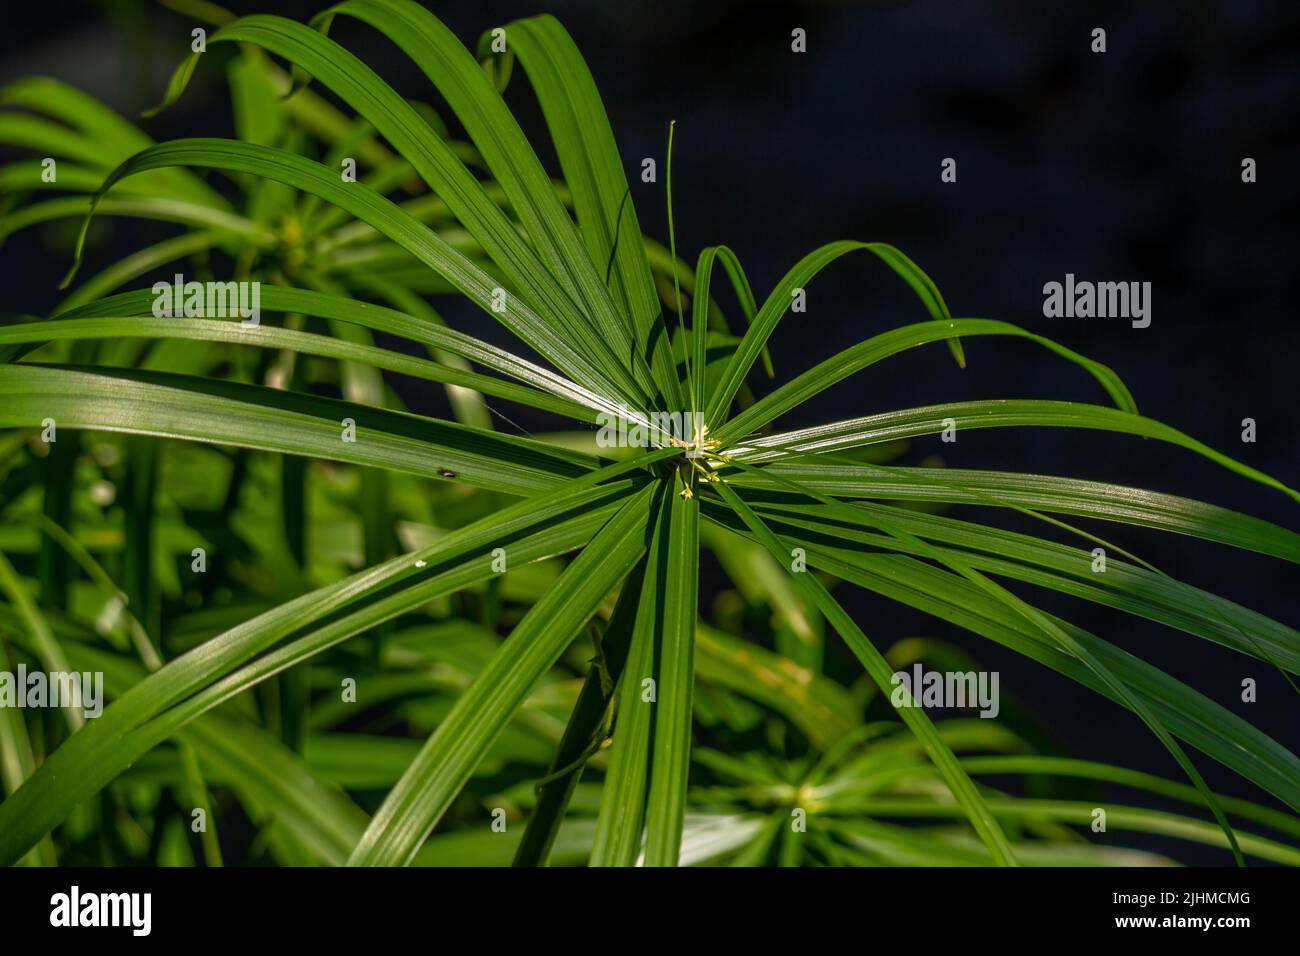 The leaves of the umbrella sedge plant in the form of small blades spread out to form like an umbrella, isolated on a blurry background Stock Photo